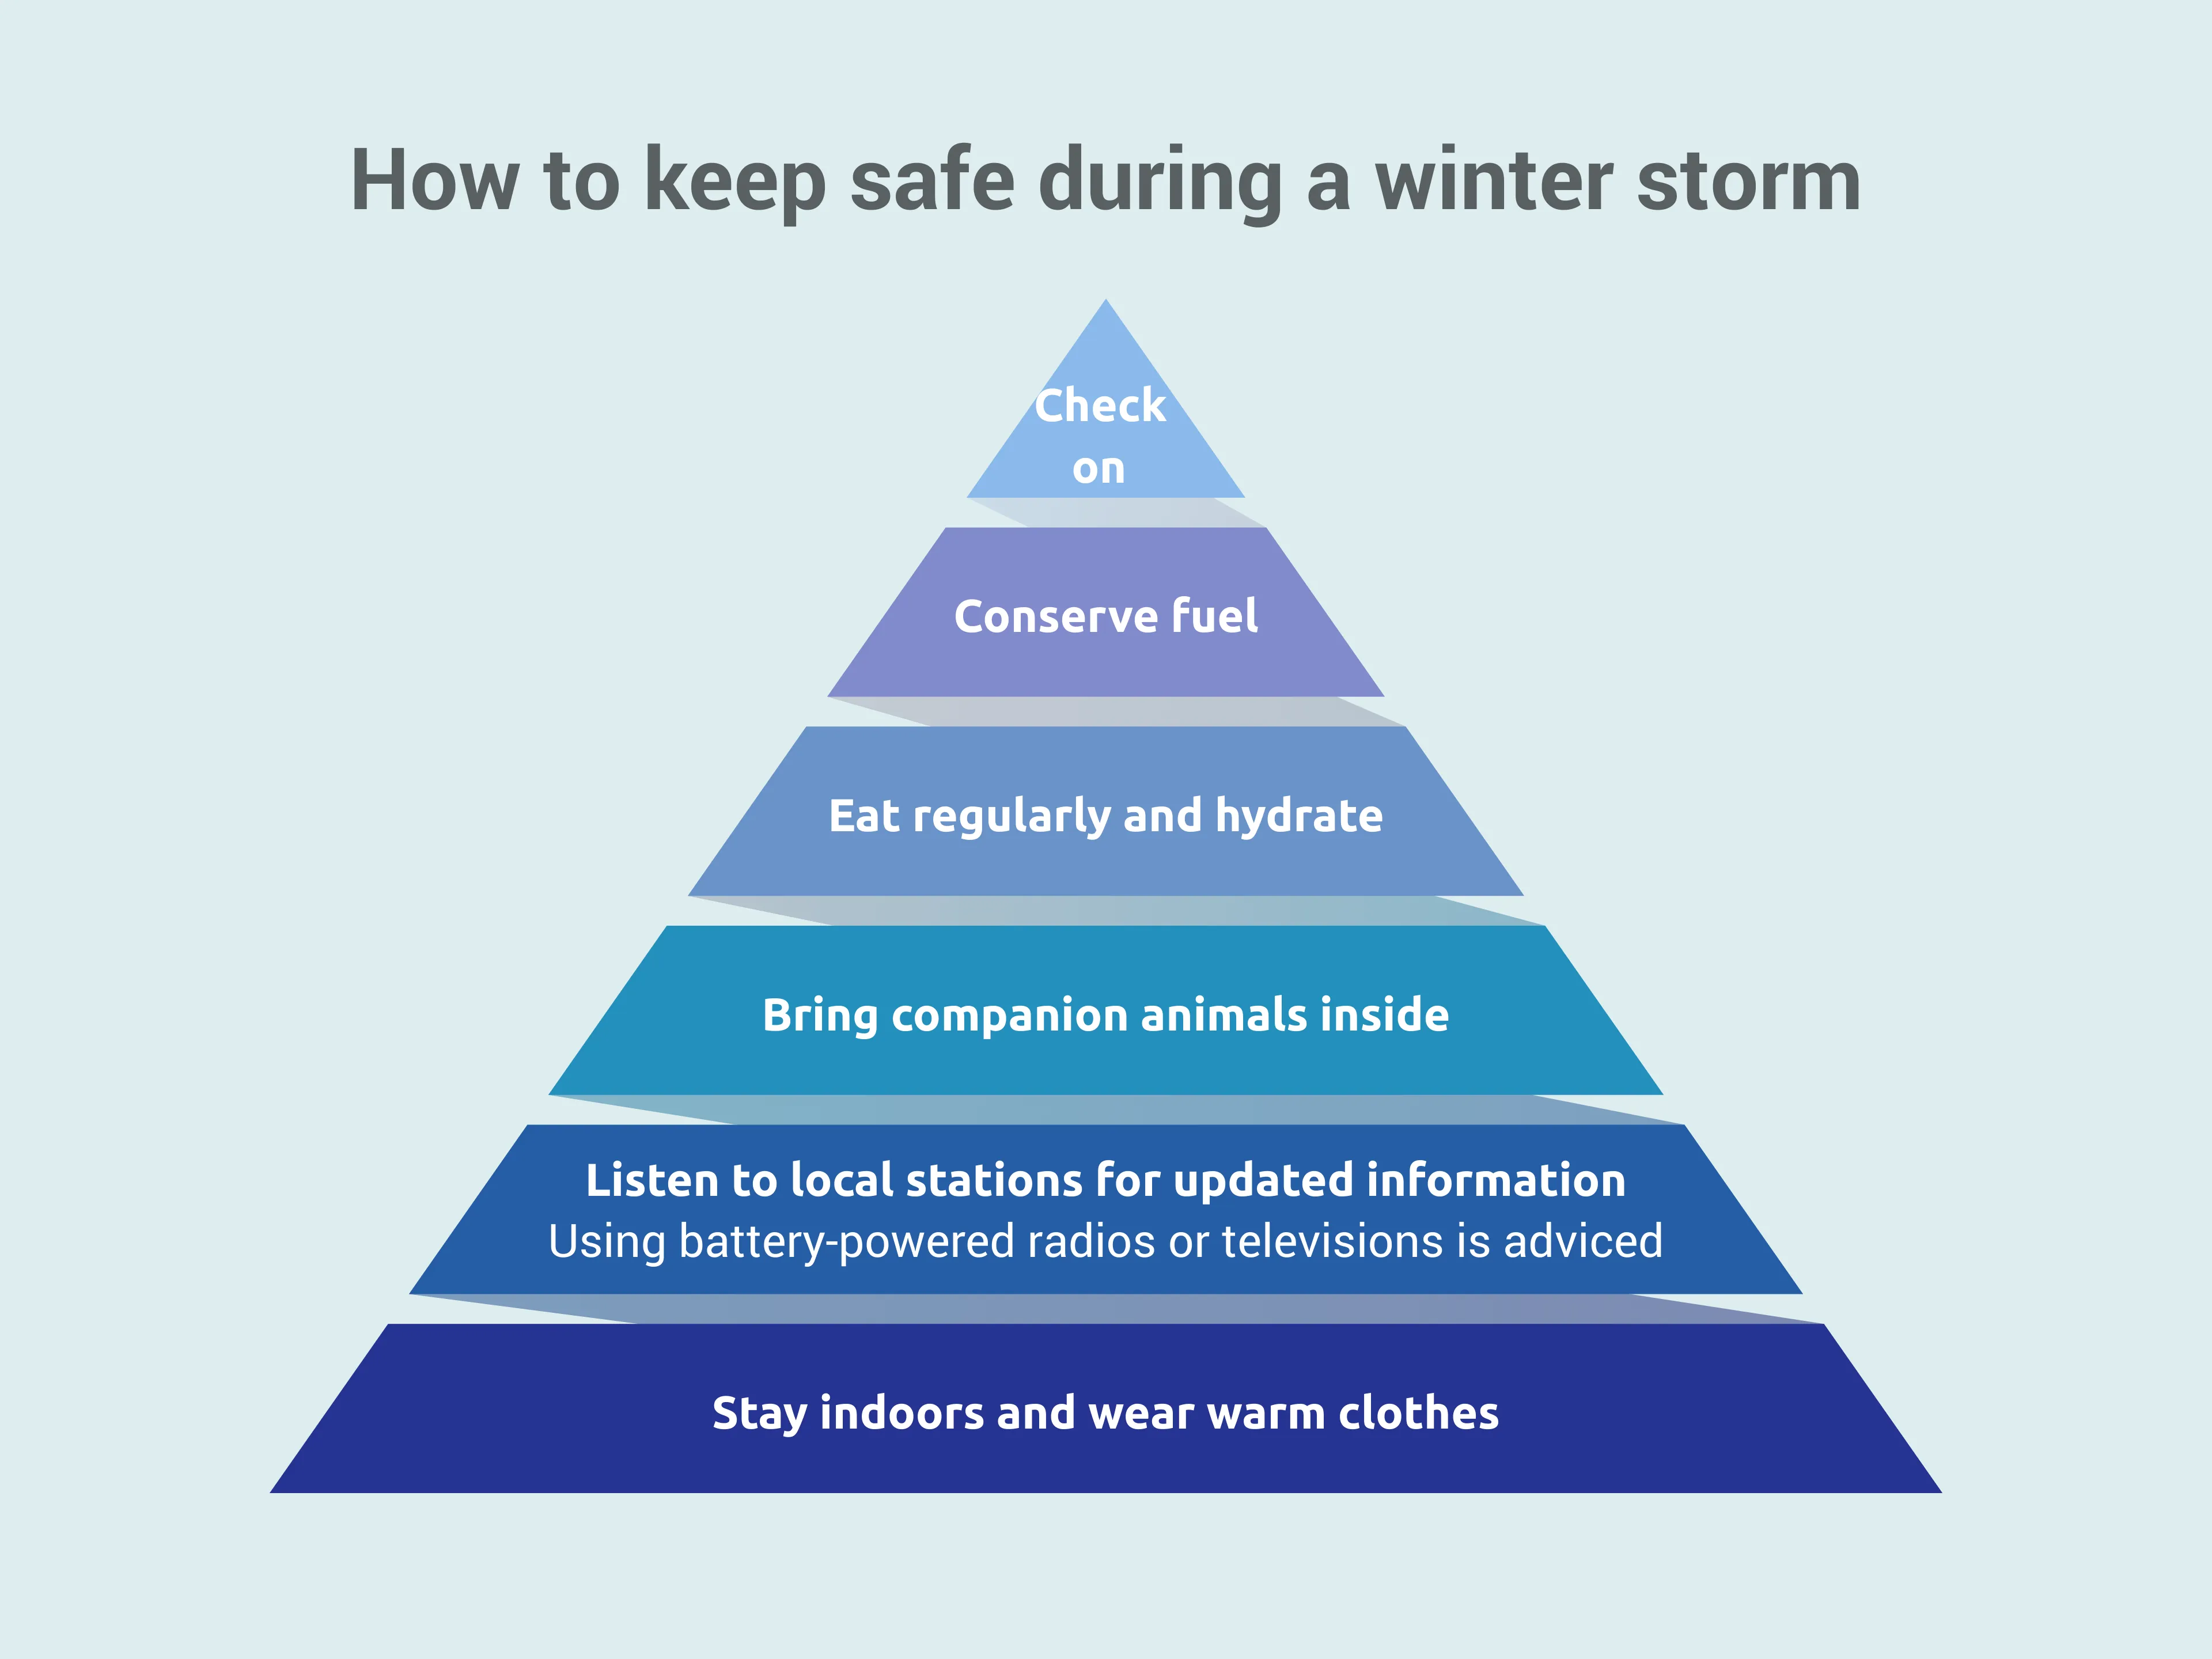 How to keep safe during a winter storm